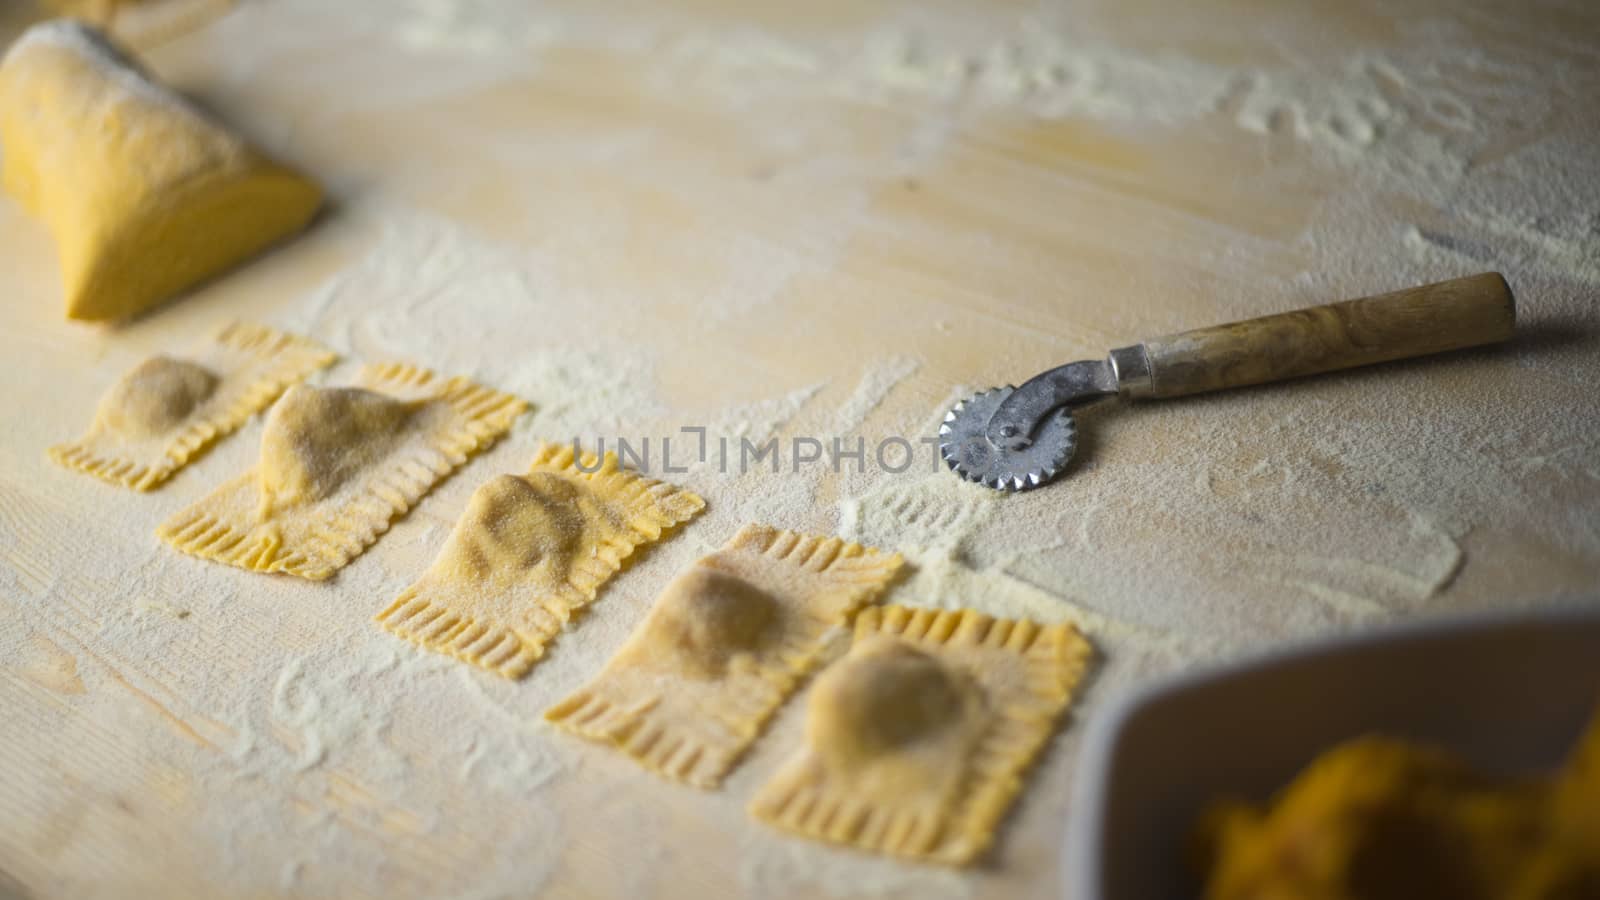 Closeup of pumpkin ravioli vegan, traditional Italian pasta, homemade pasta just made, with the dough mass durum wheat flour, the cutting wheel and wheat flour scattered on the light wooden table